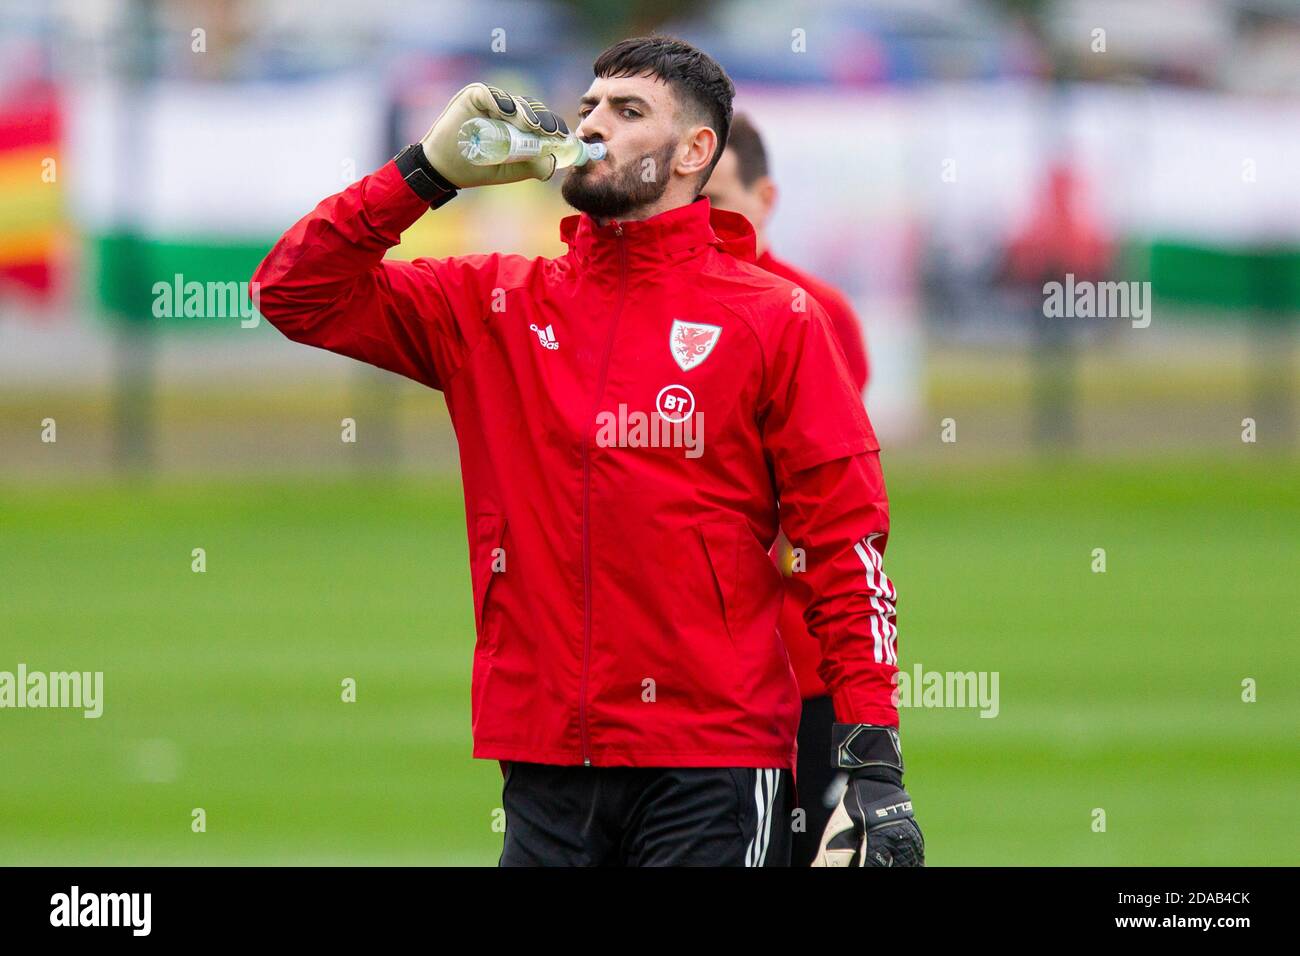 Hensol, Wales, UK. 11th Nov, 2020. Goalkeeper Tom King during Wales  national football team training at Vale Resort ahead of matches against  USA, Republic of Ireland and Finland. Credit: Mark Hawkins/Alamy Live